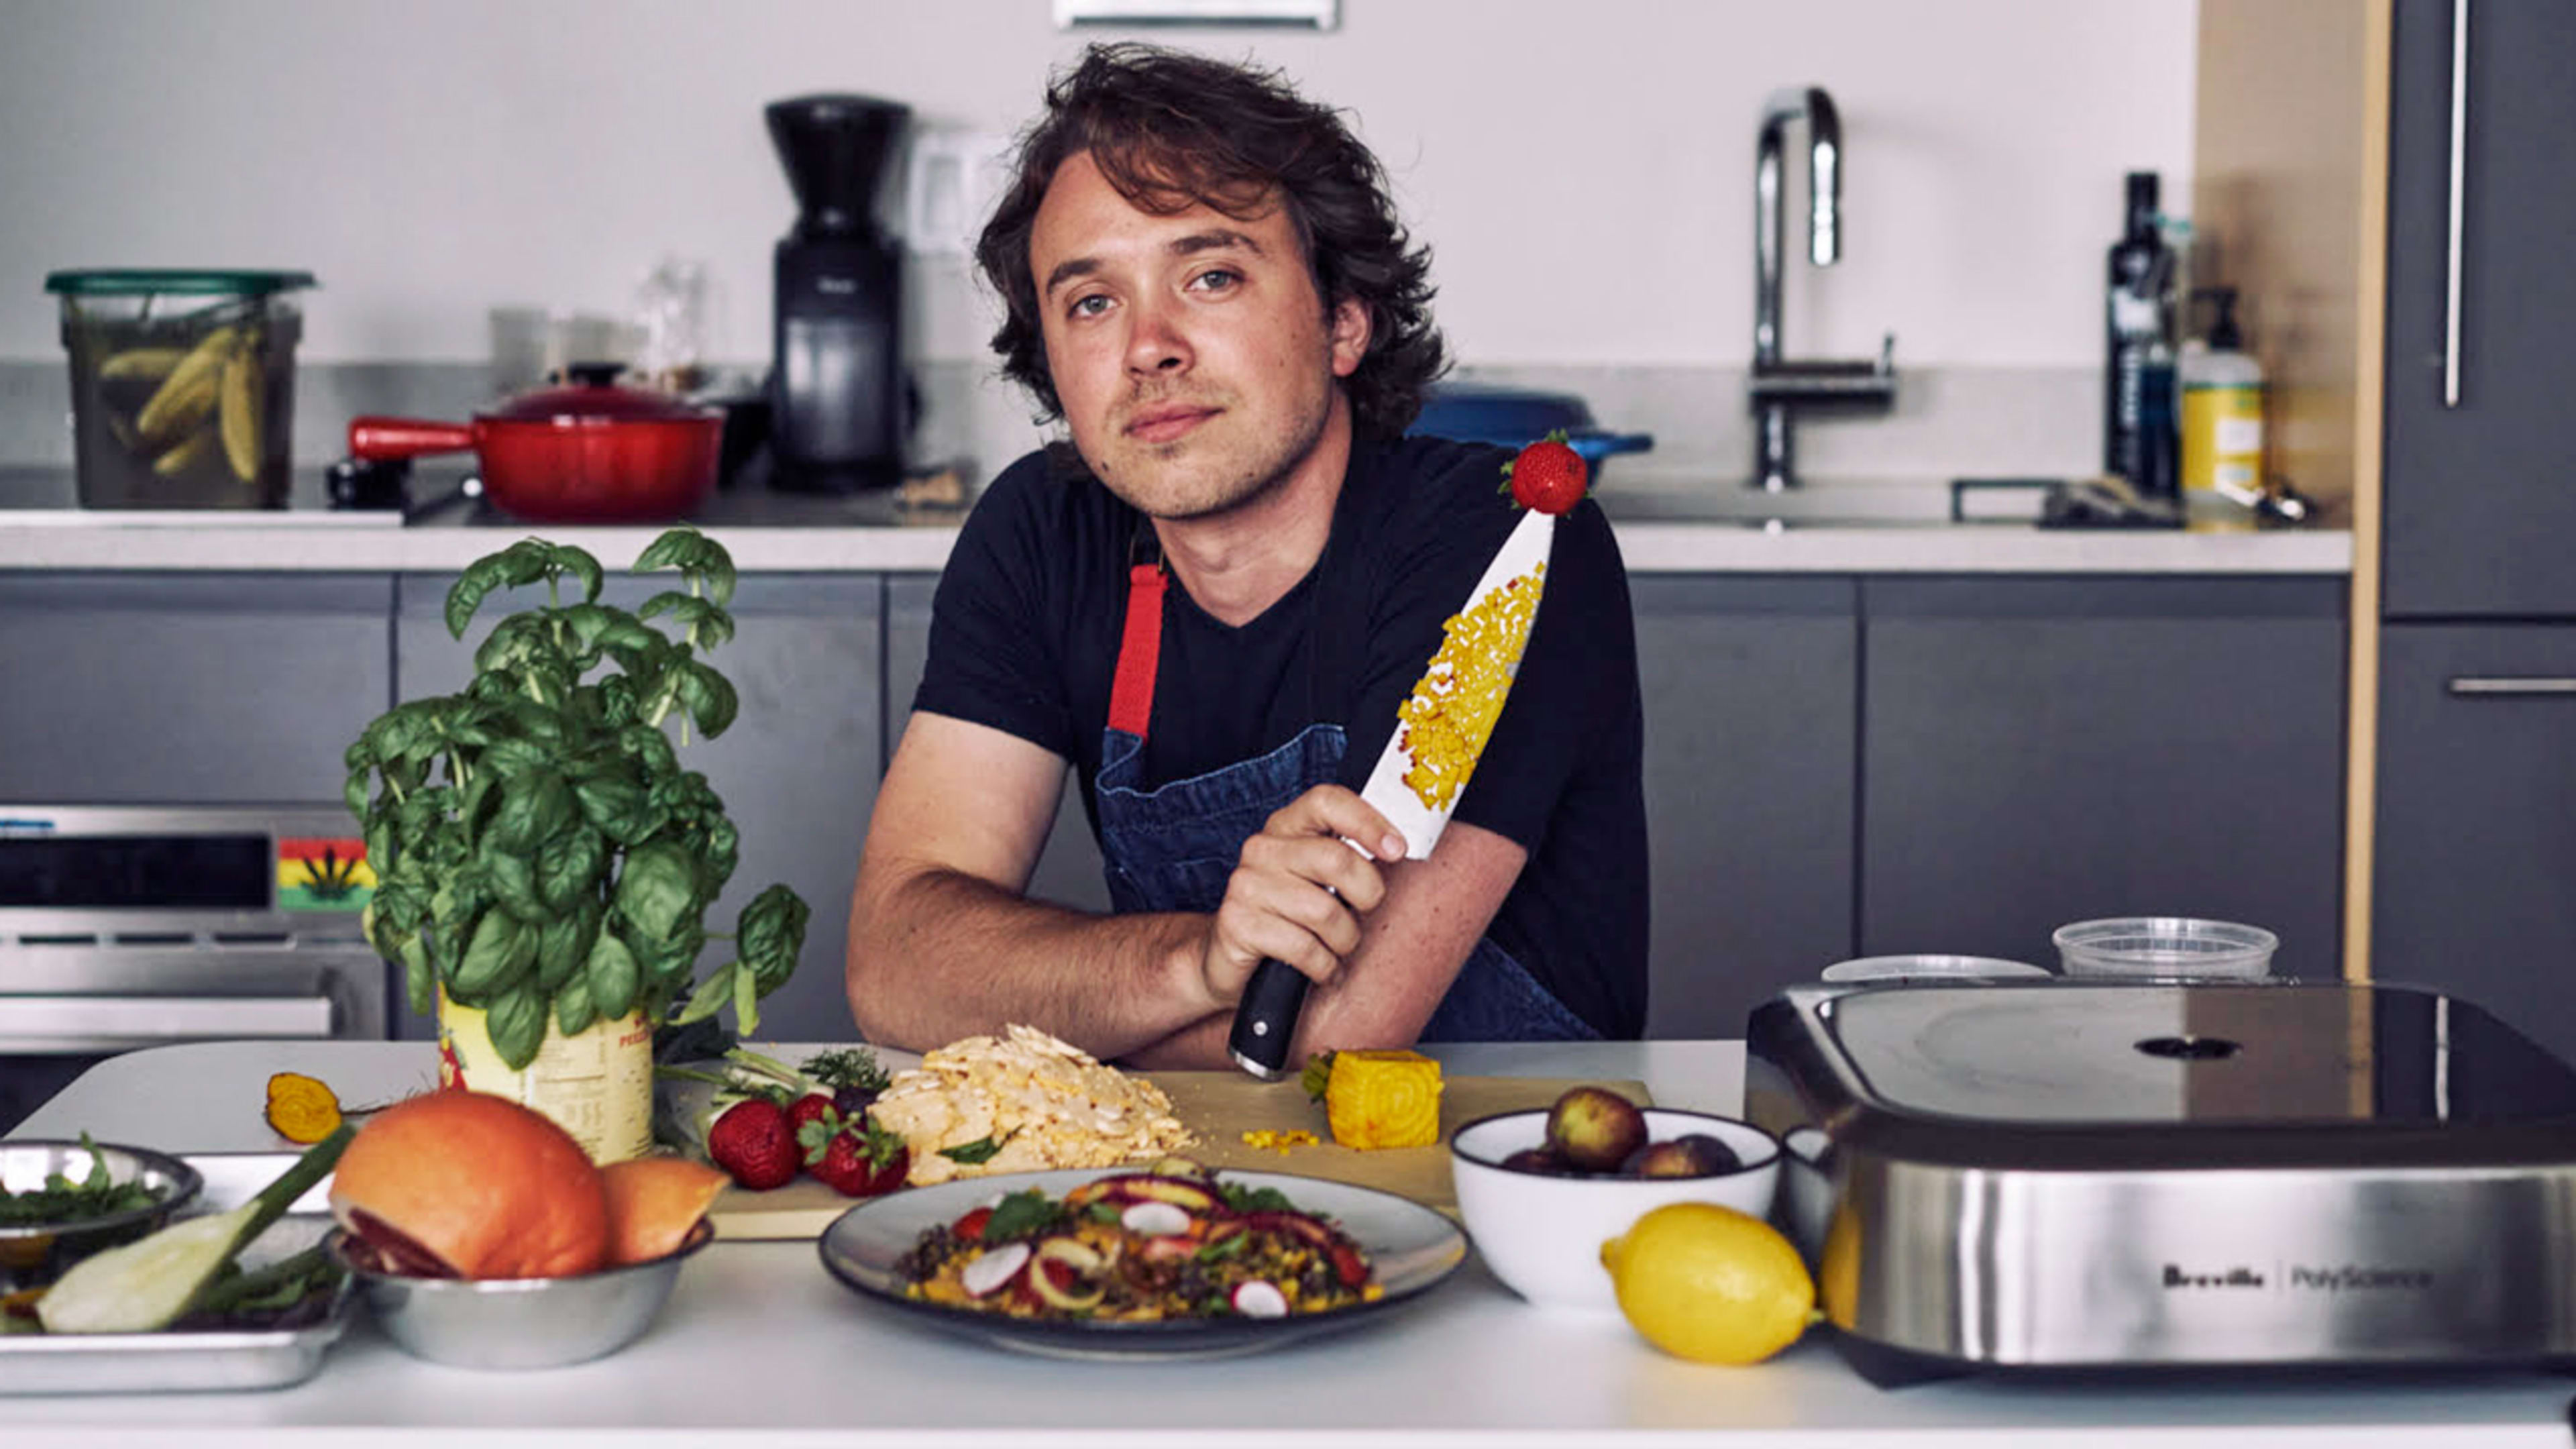 How Tastemade’s ‘Struggle Meals’ became the food TV everyone craves right now